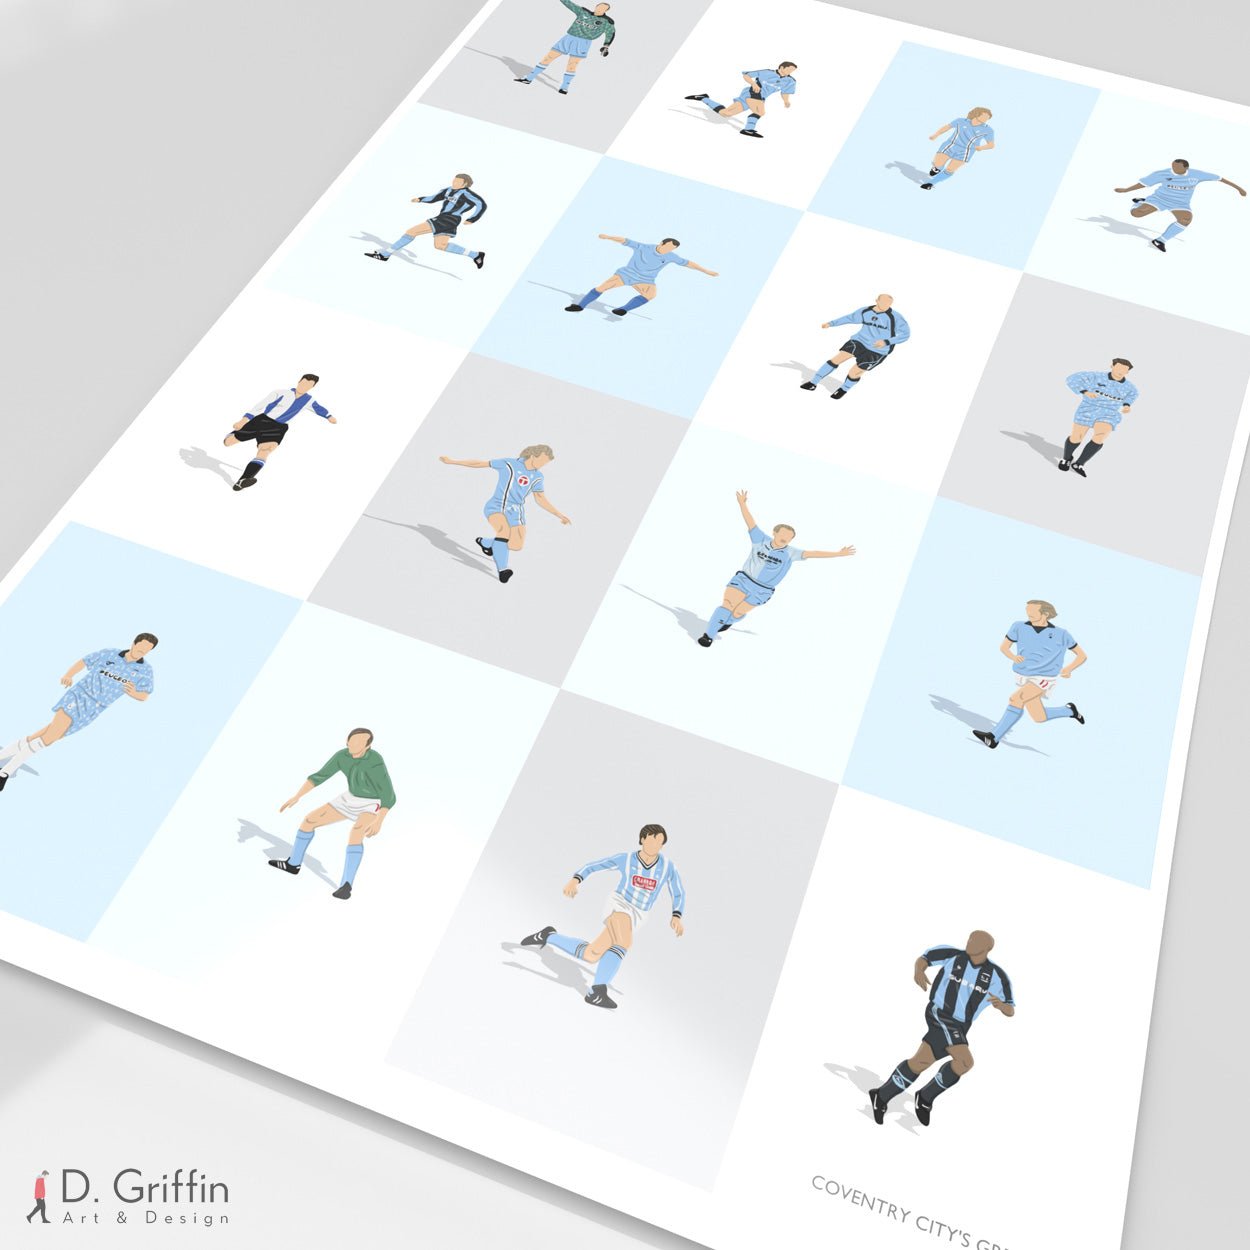 Coventry City Legends Print - North Section